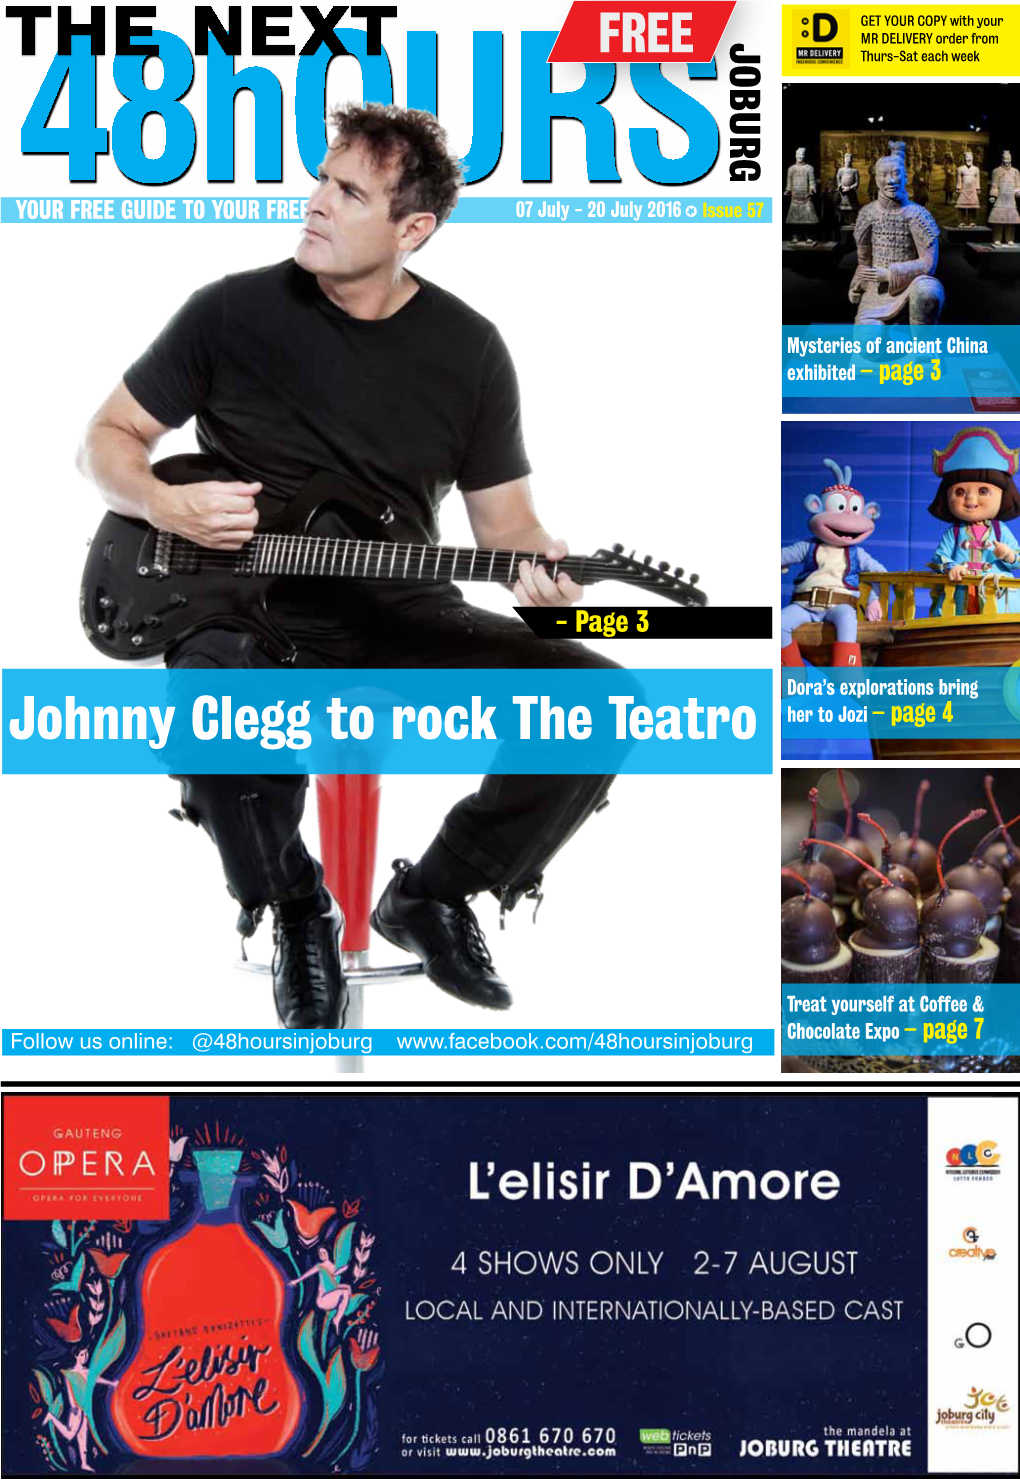 Johnny Clegg to Rock the Teatro Her to Jozi – Page 4